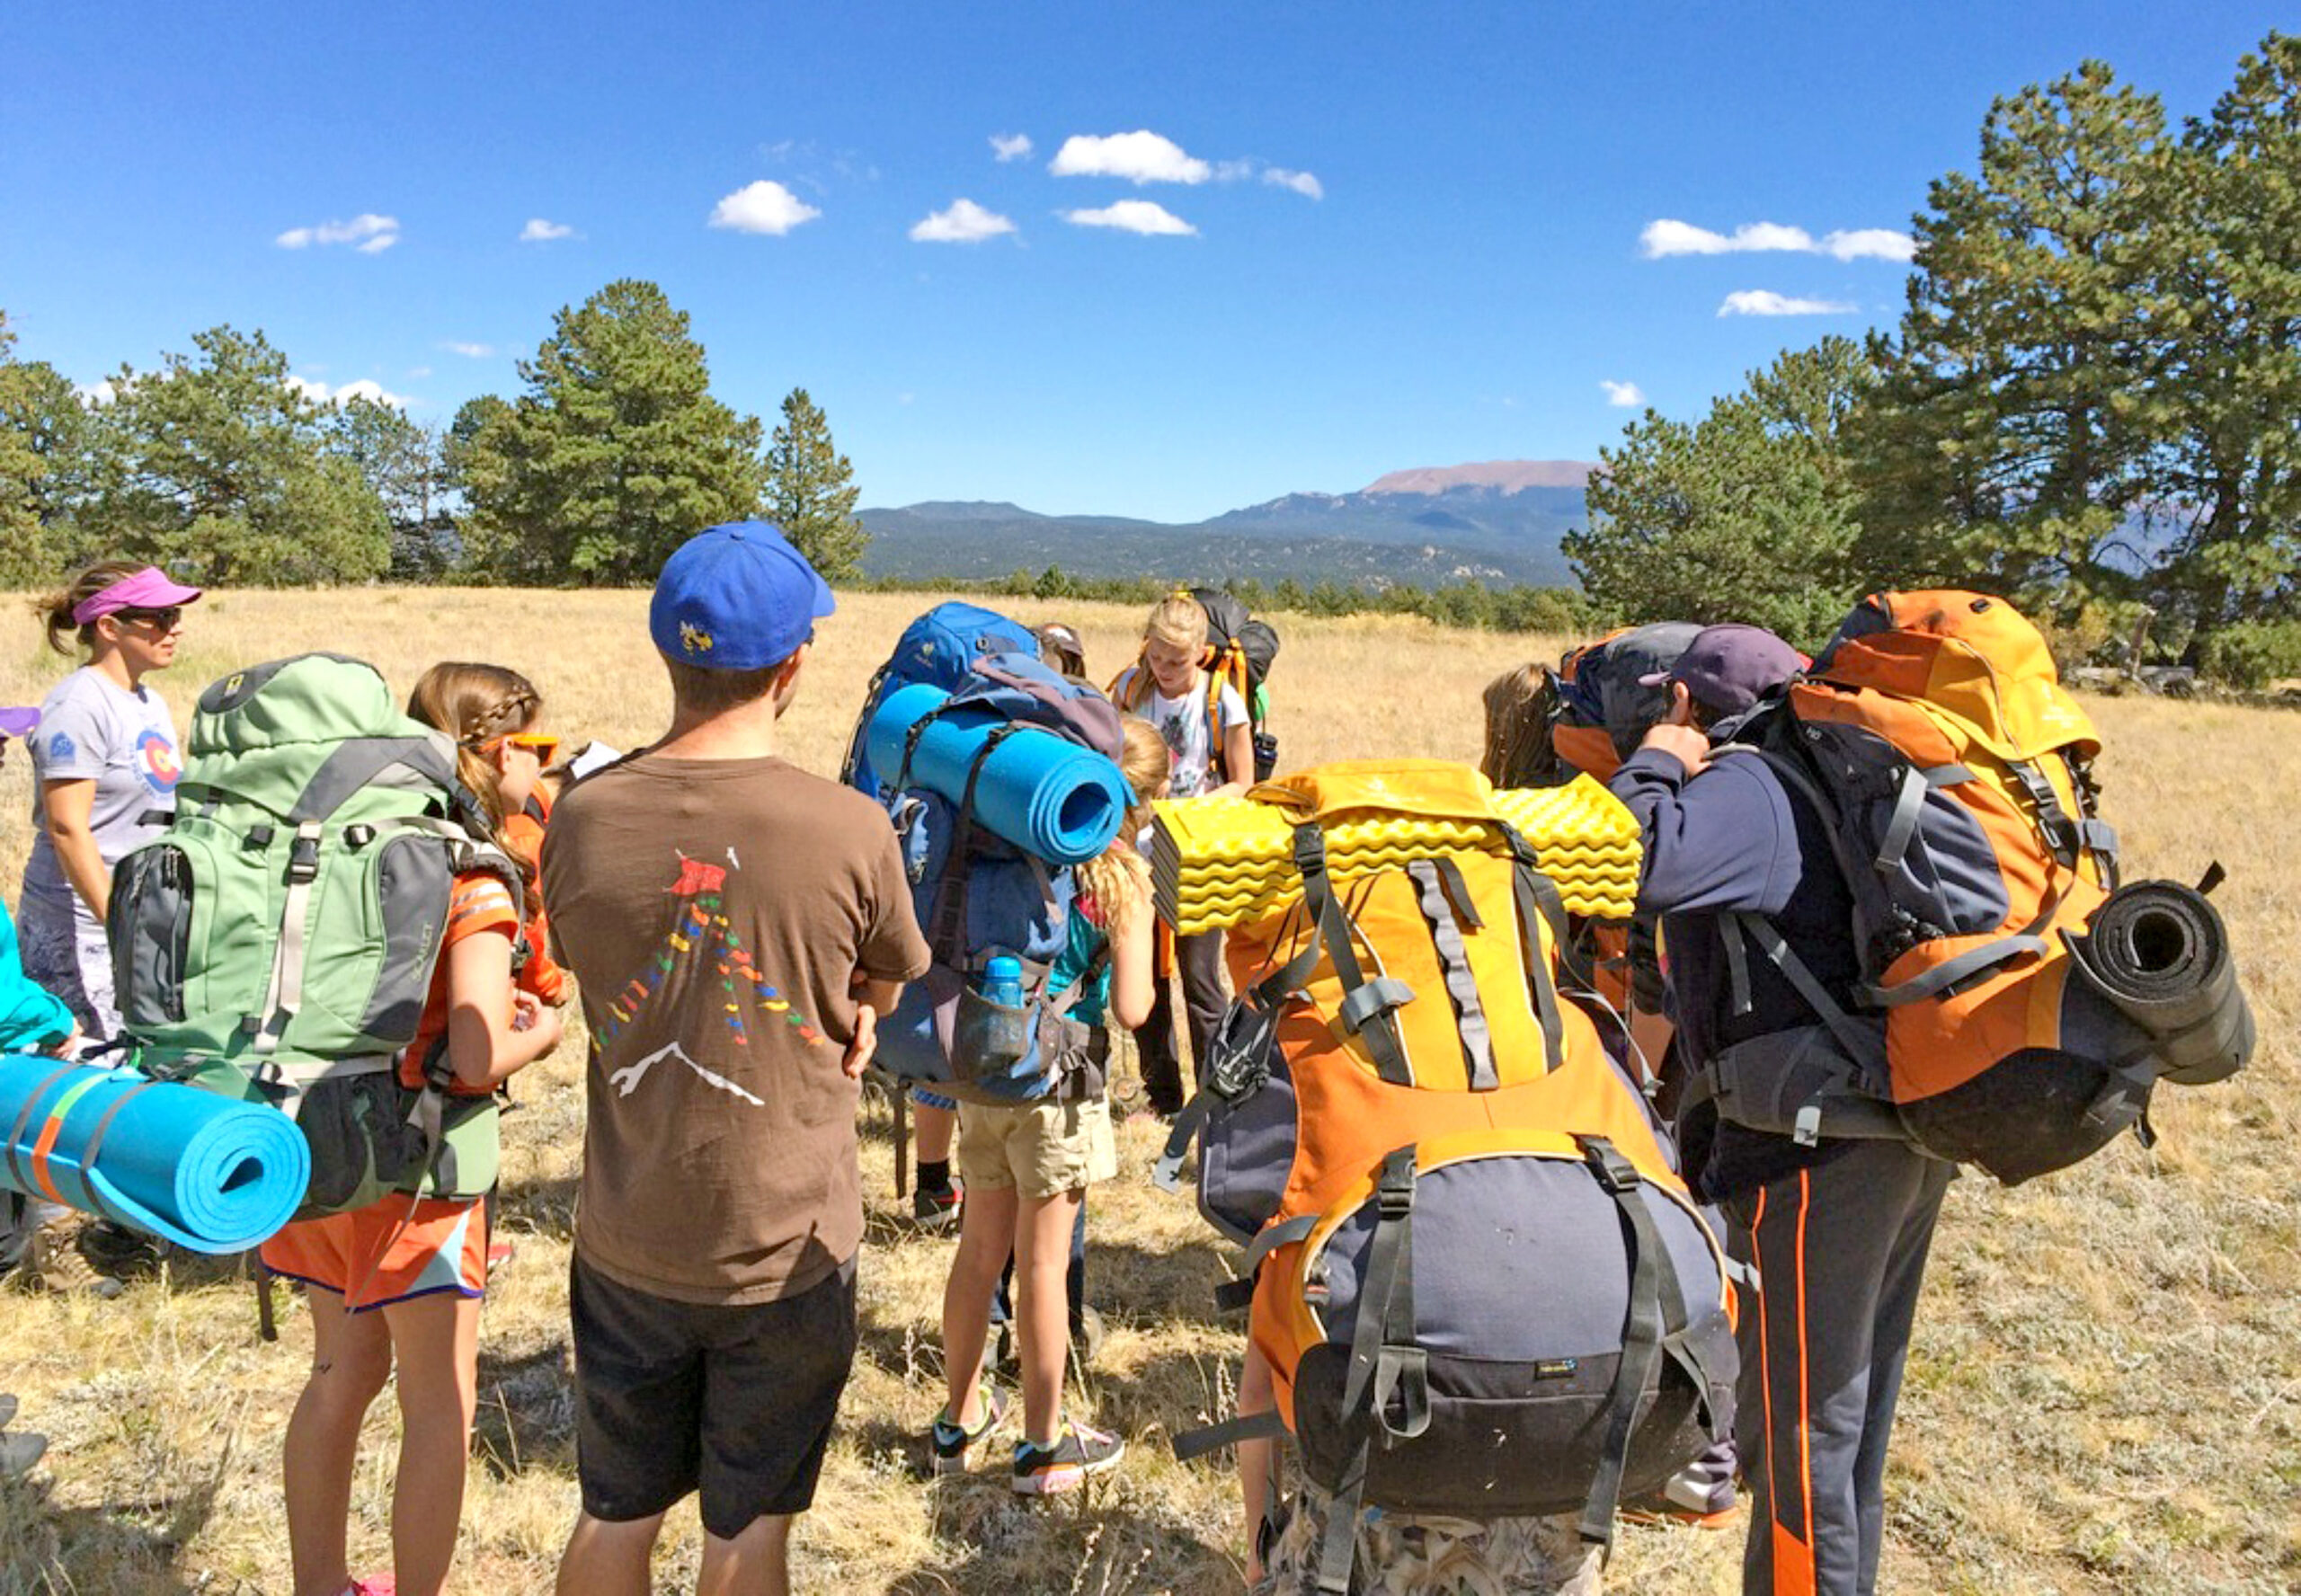 Courtesy image. Mountain Academy students had a beautiful view of Pikes Peak during this camping trip.